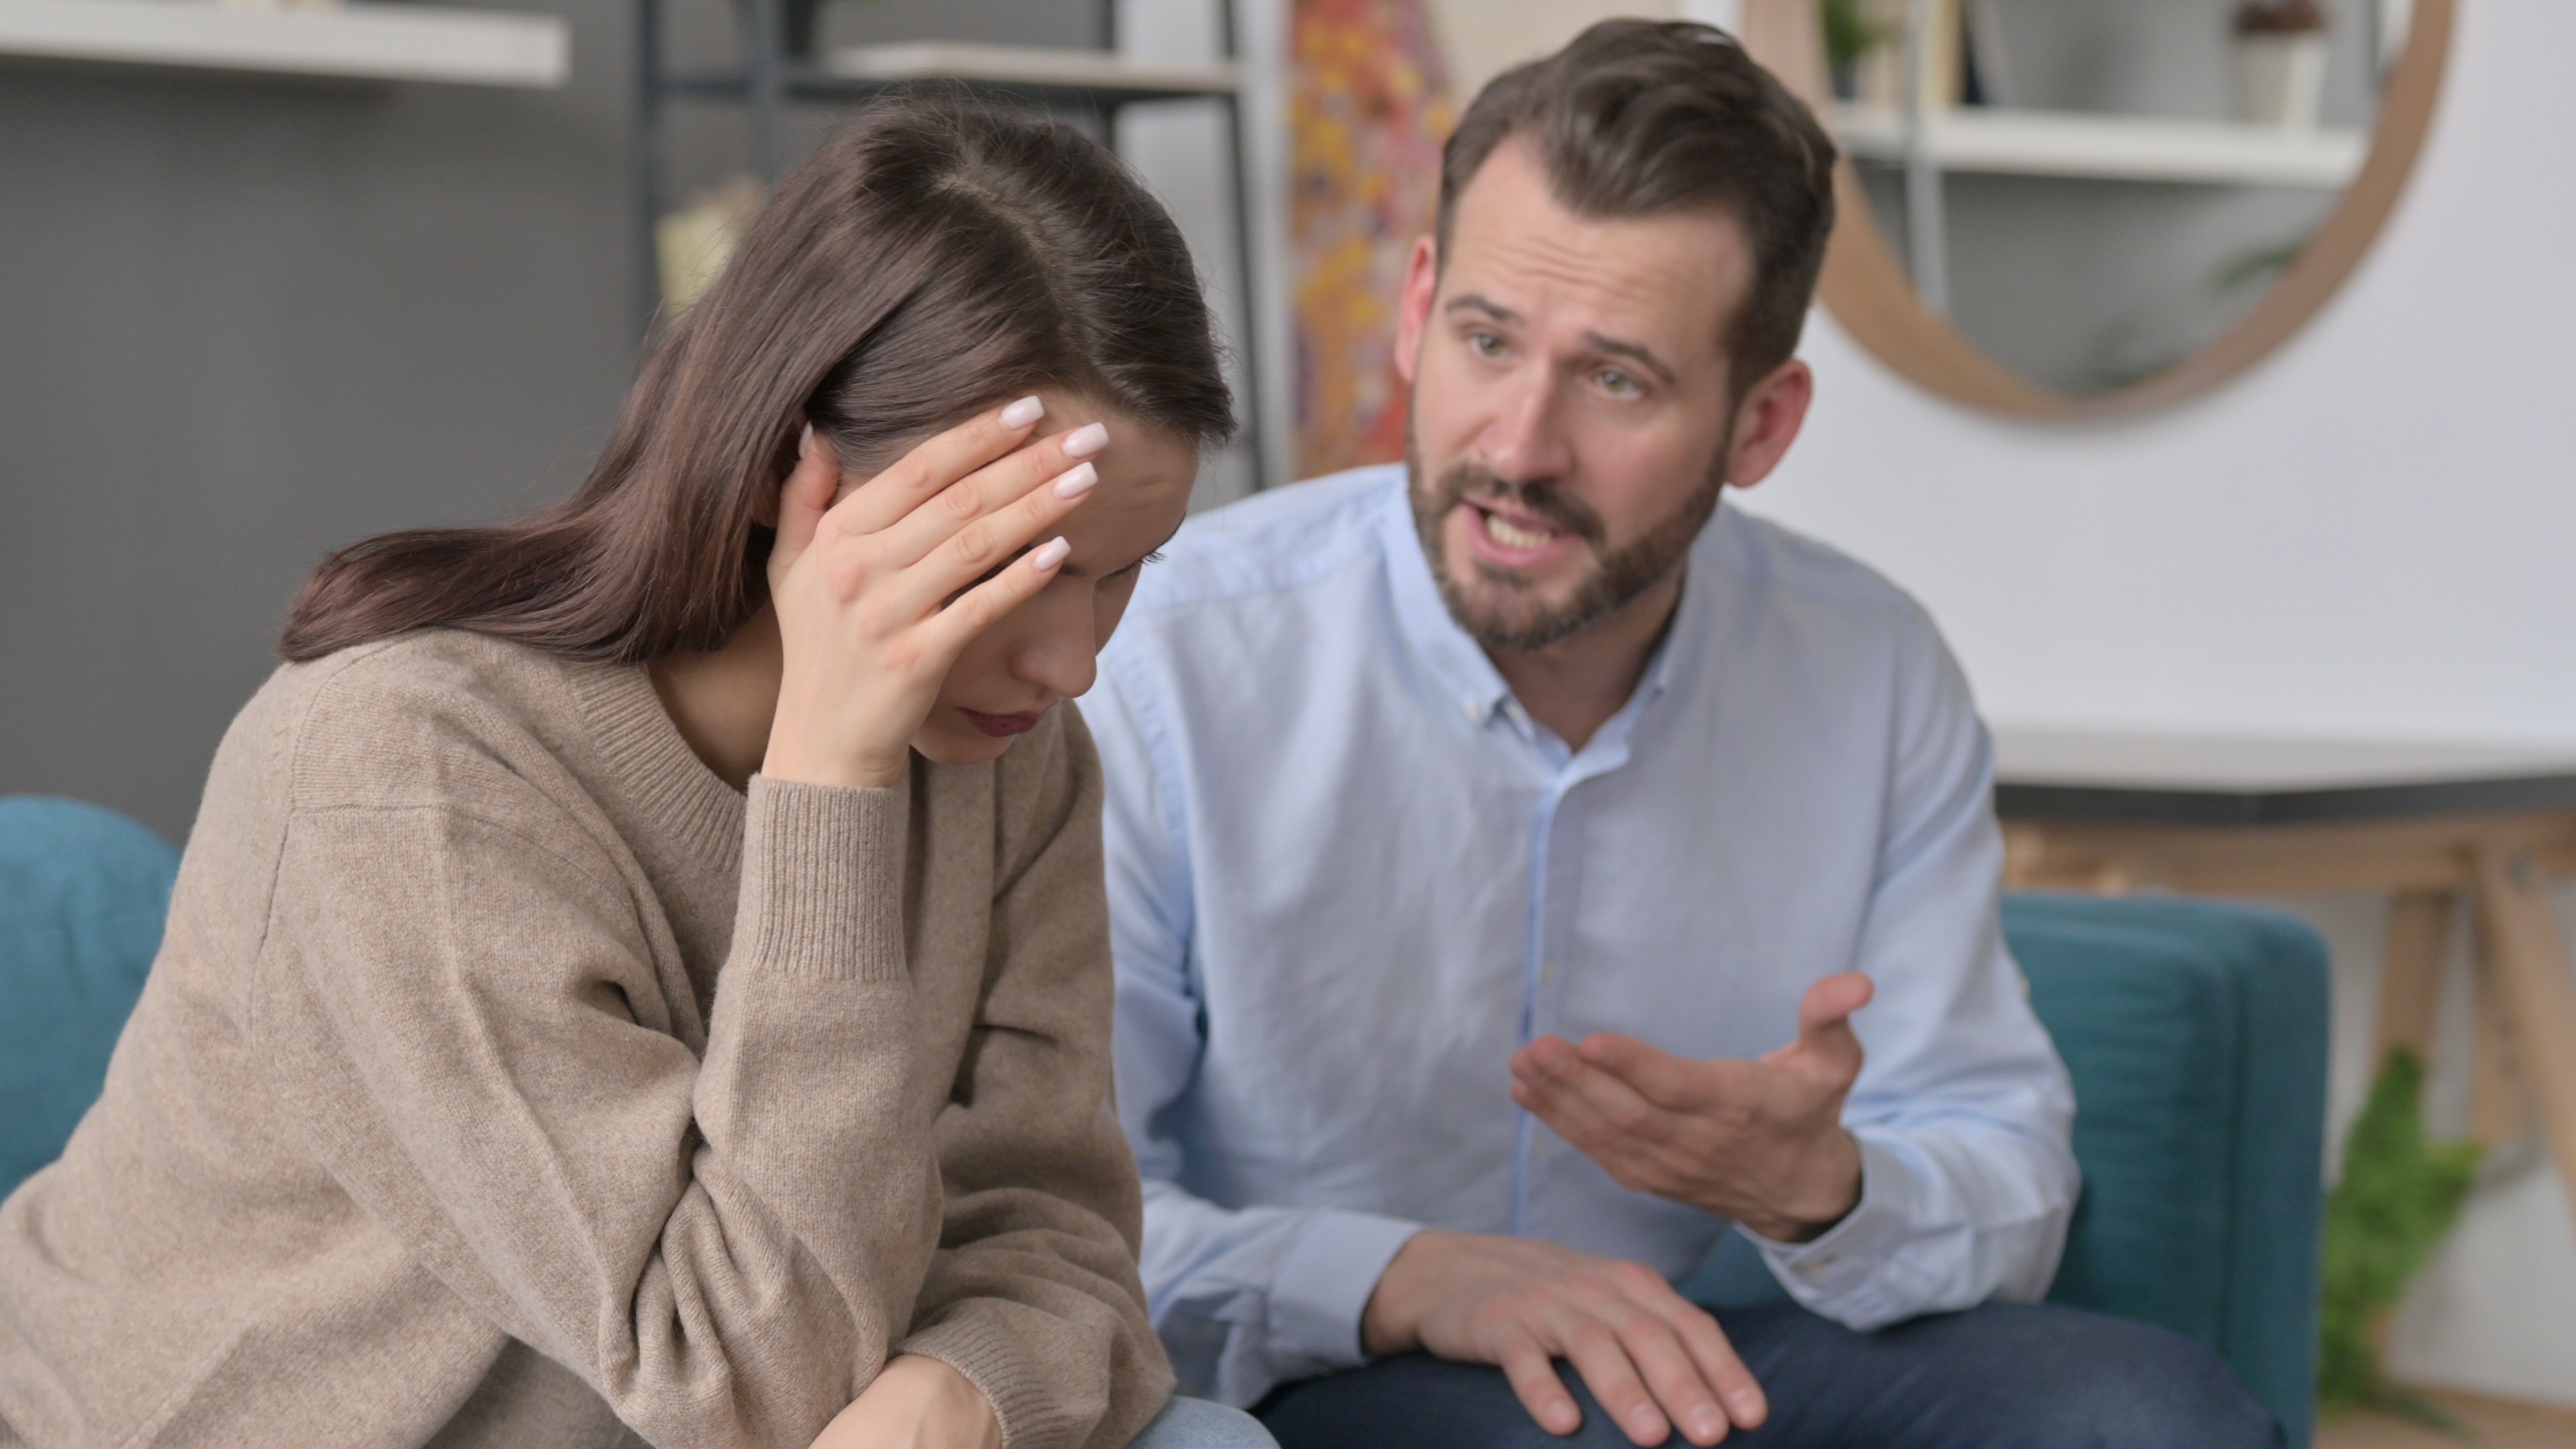 Woman feels stressed during an argument with her husband | Source: Shutterstock